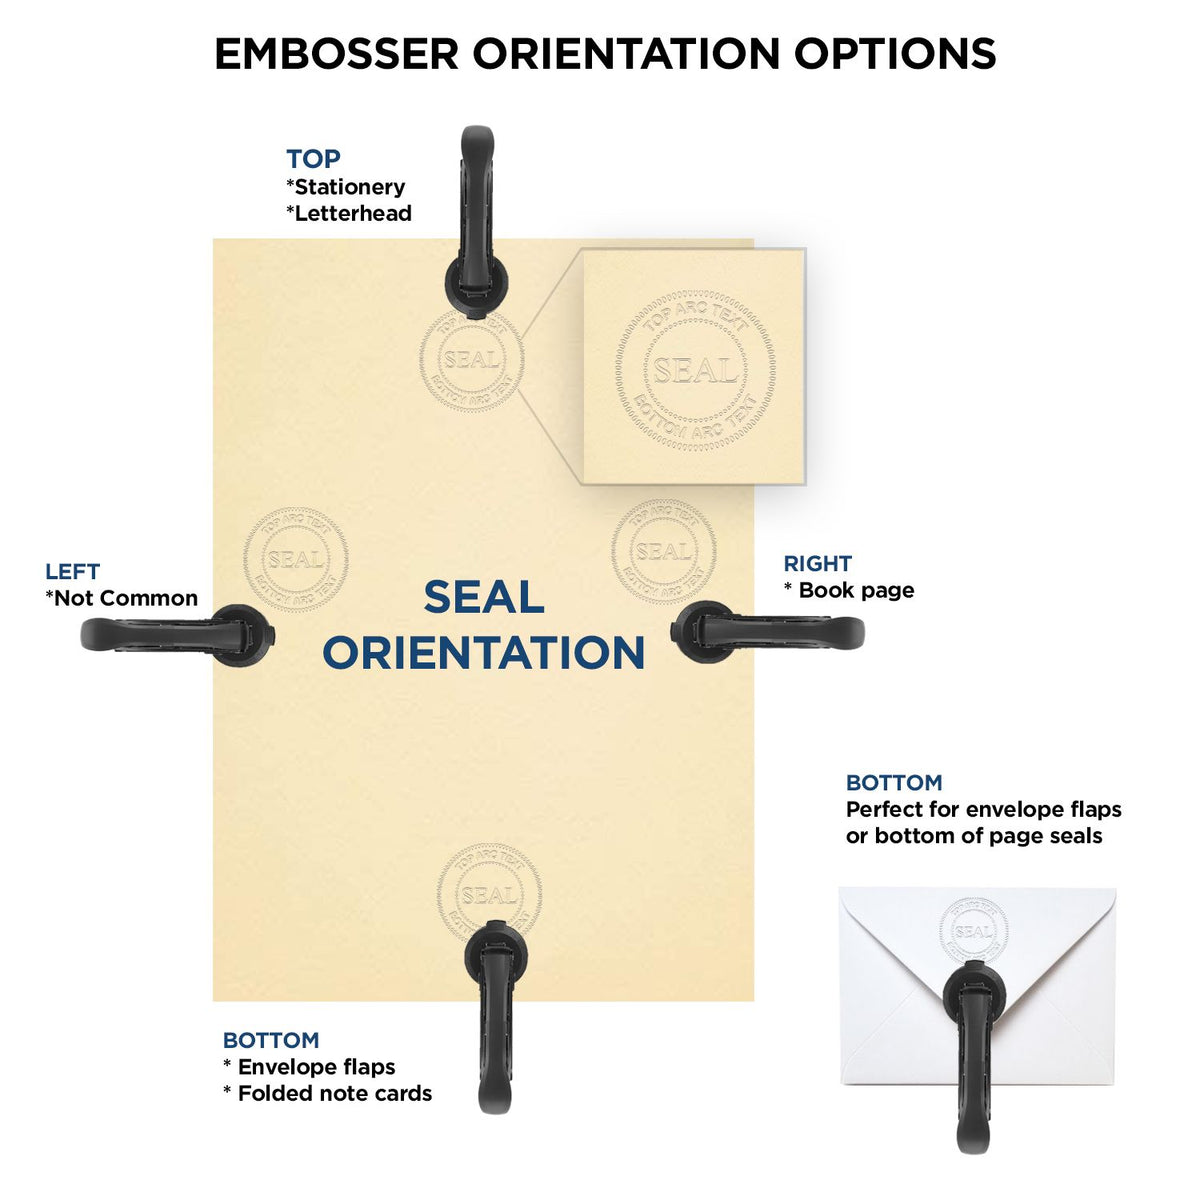 An infographic for the Hybrid New York Land Surveyor Seal showing embosser orientation, this is showing examples of a top, bottom, right and left insert.